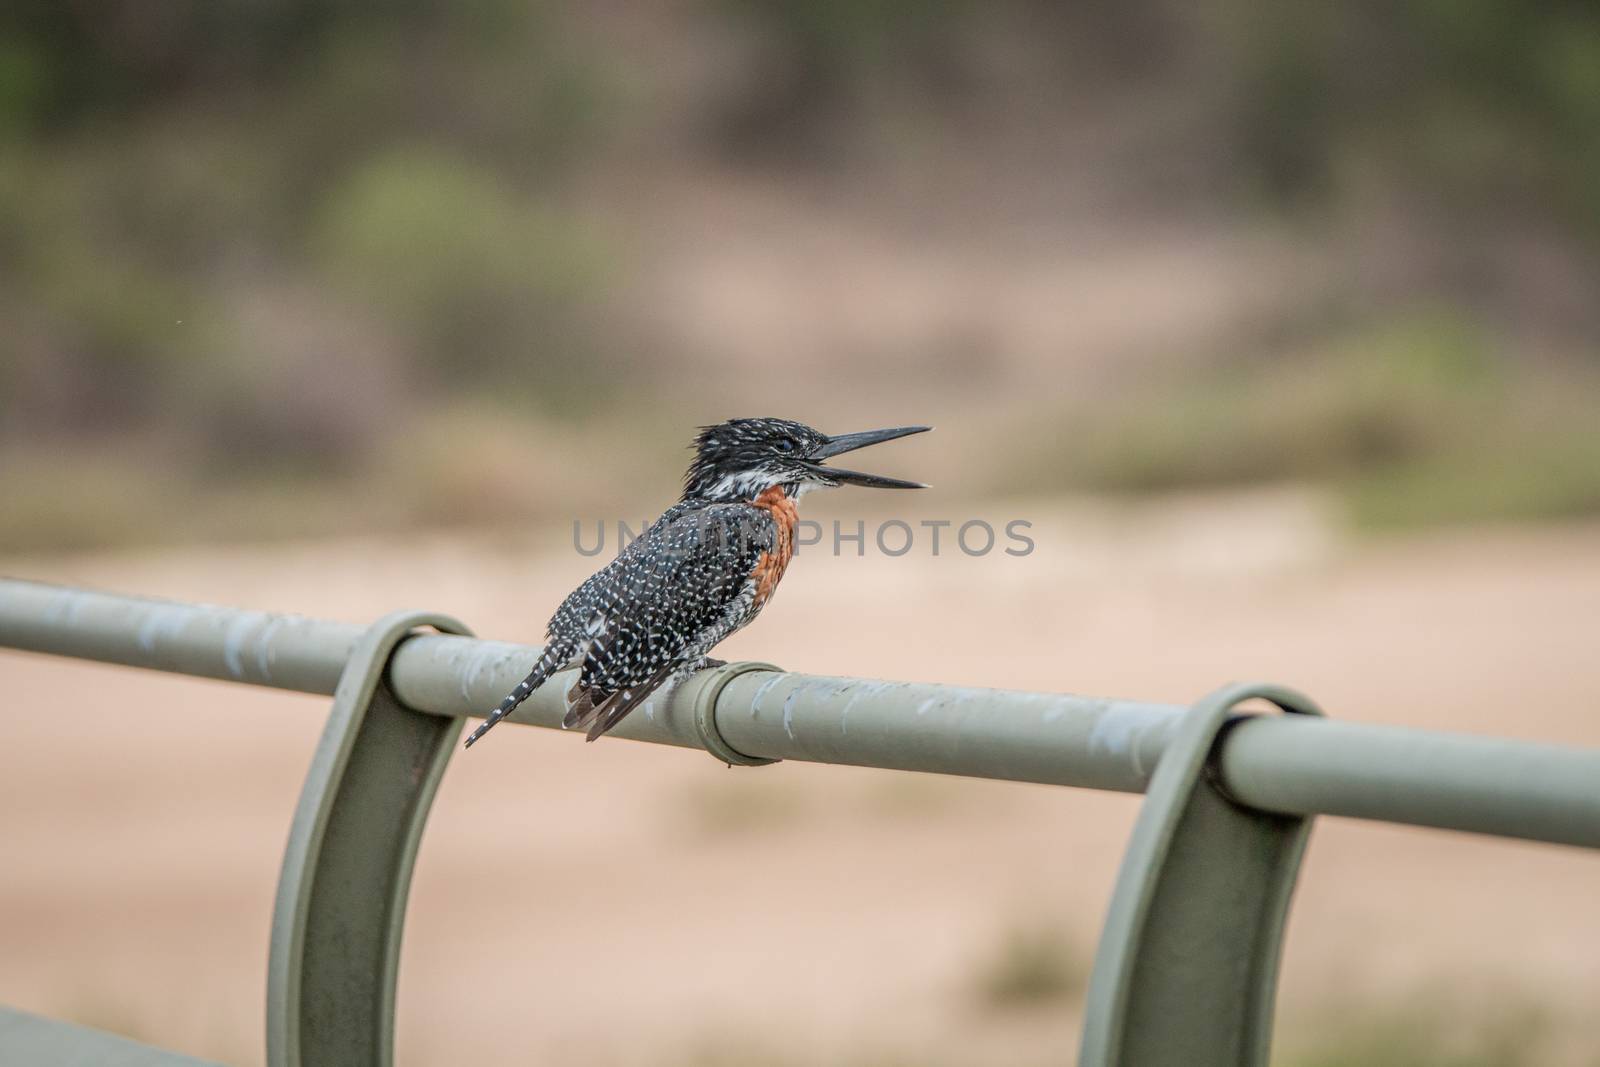 Giant kingfisher on a bridge in the Kruger National Park by Simoneemanphotography